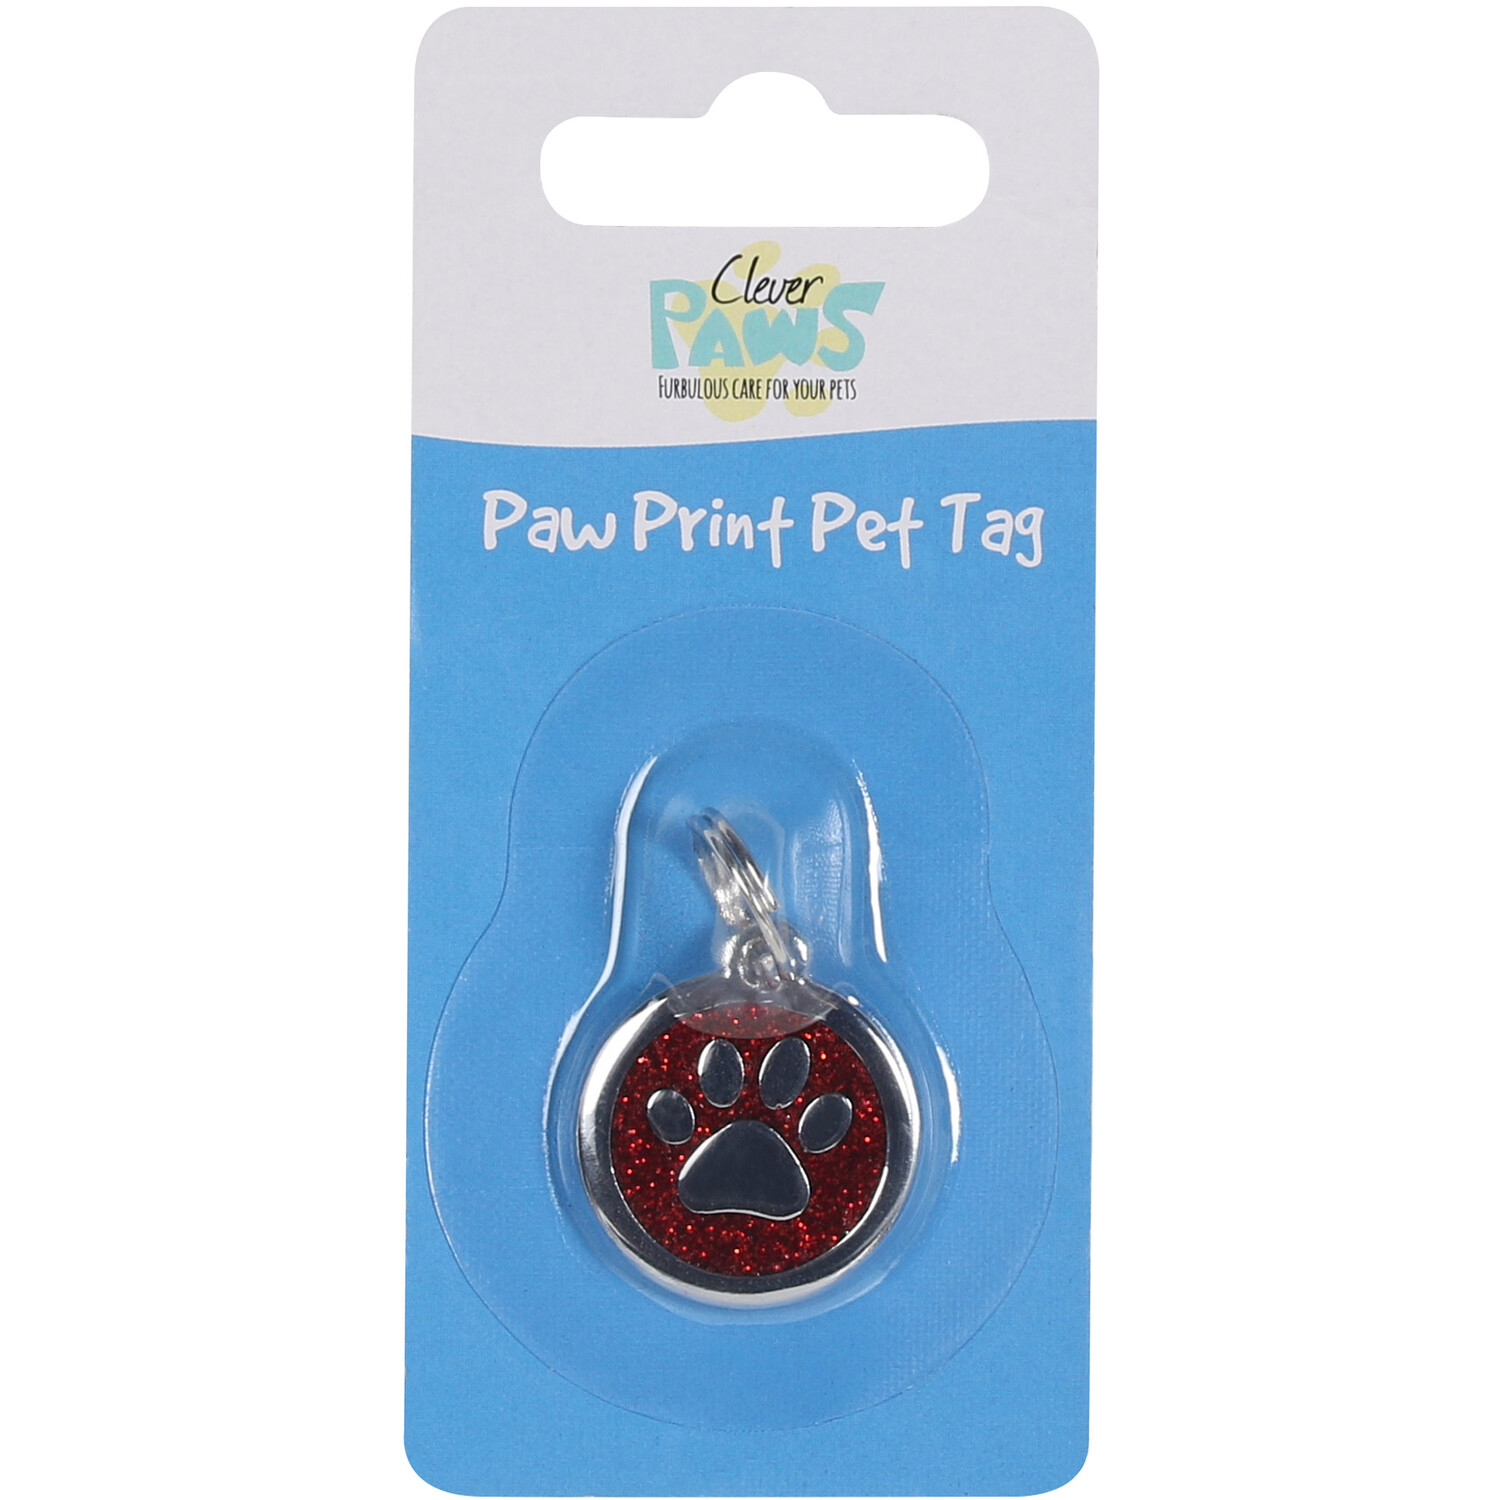 Clever Paws Pet Tag Image 5